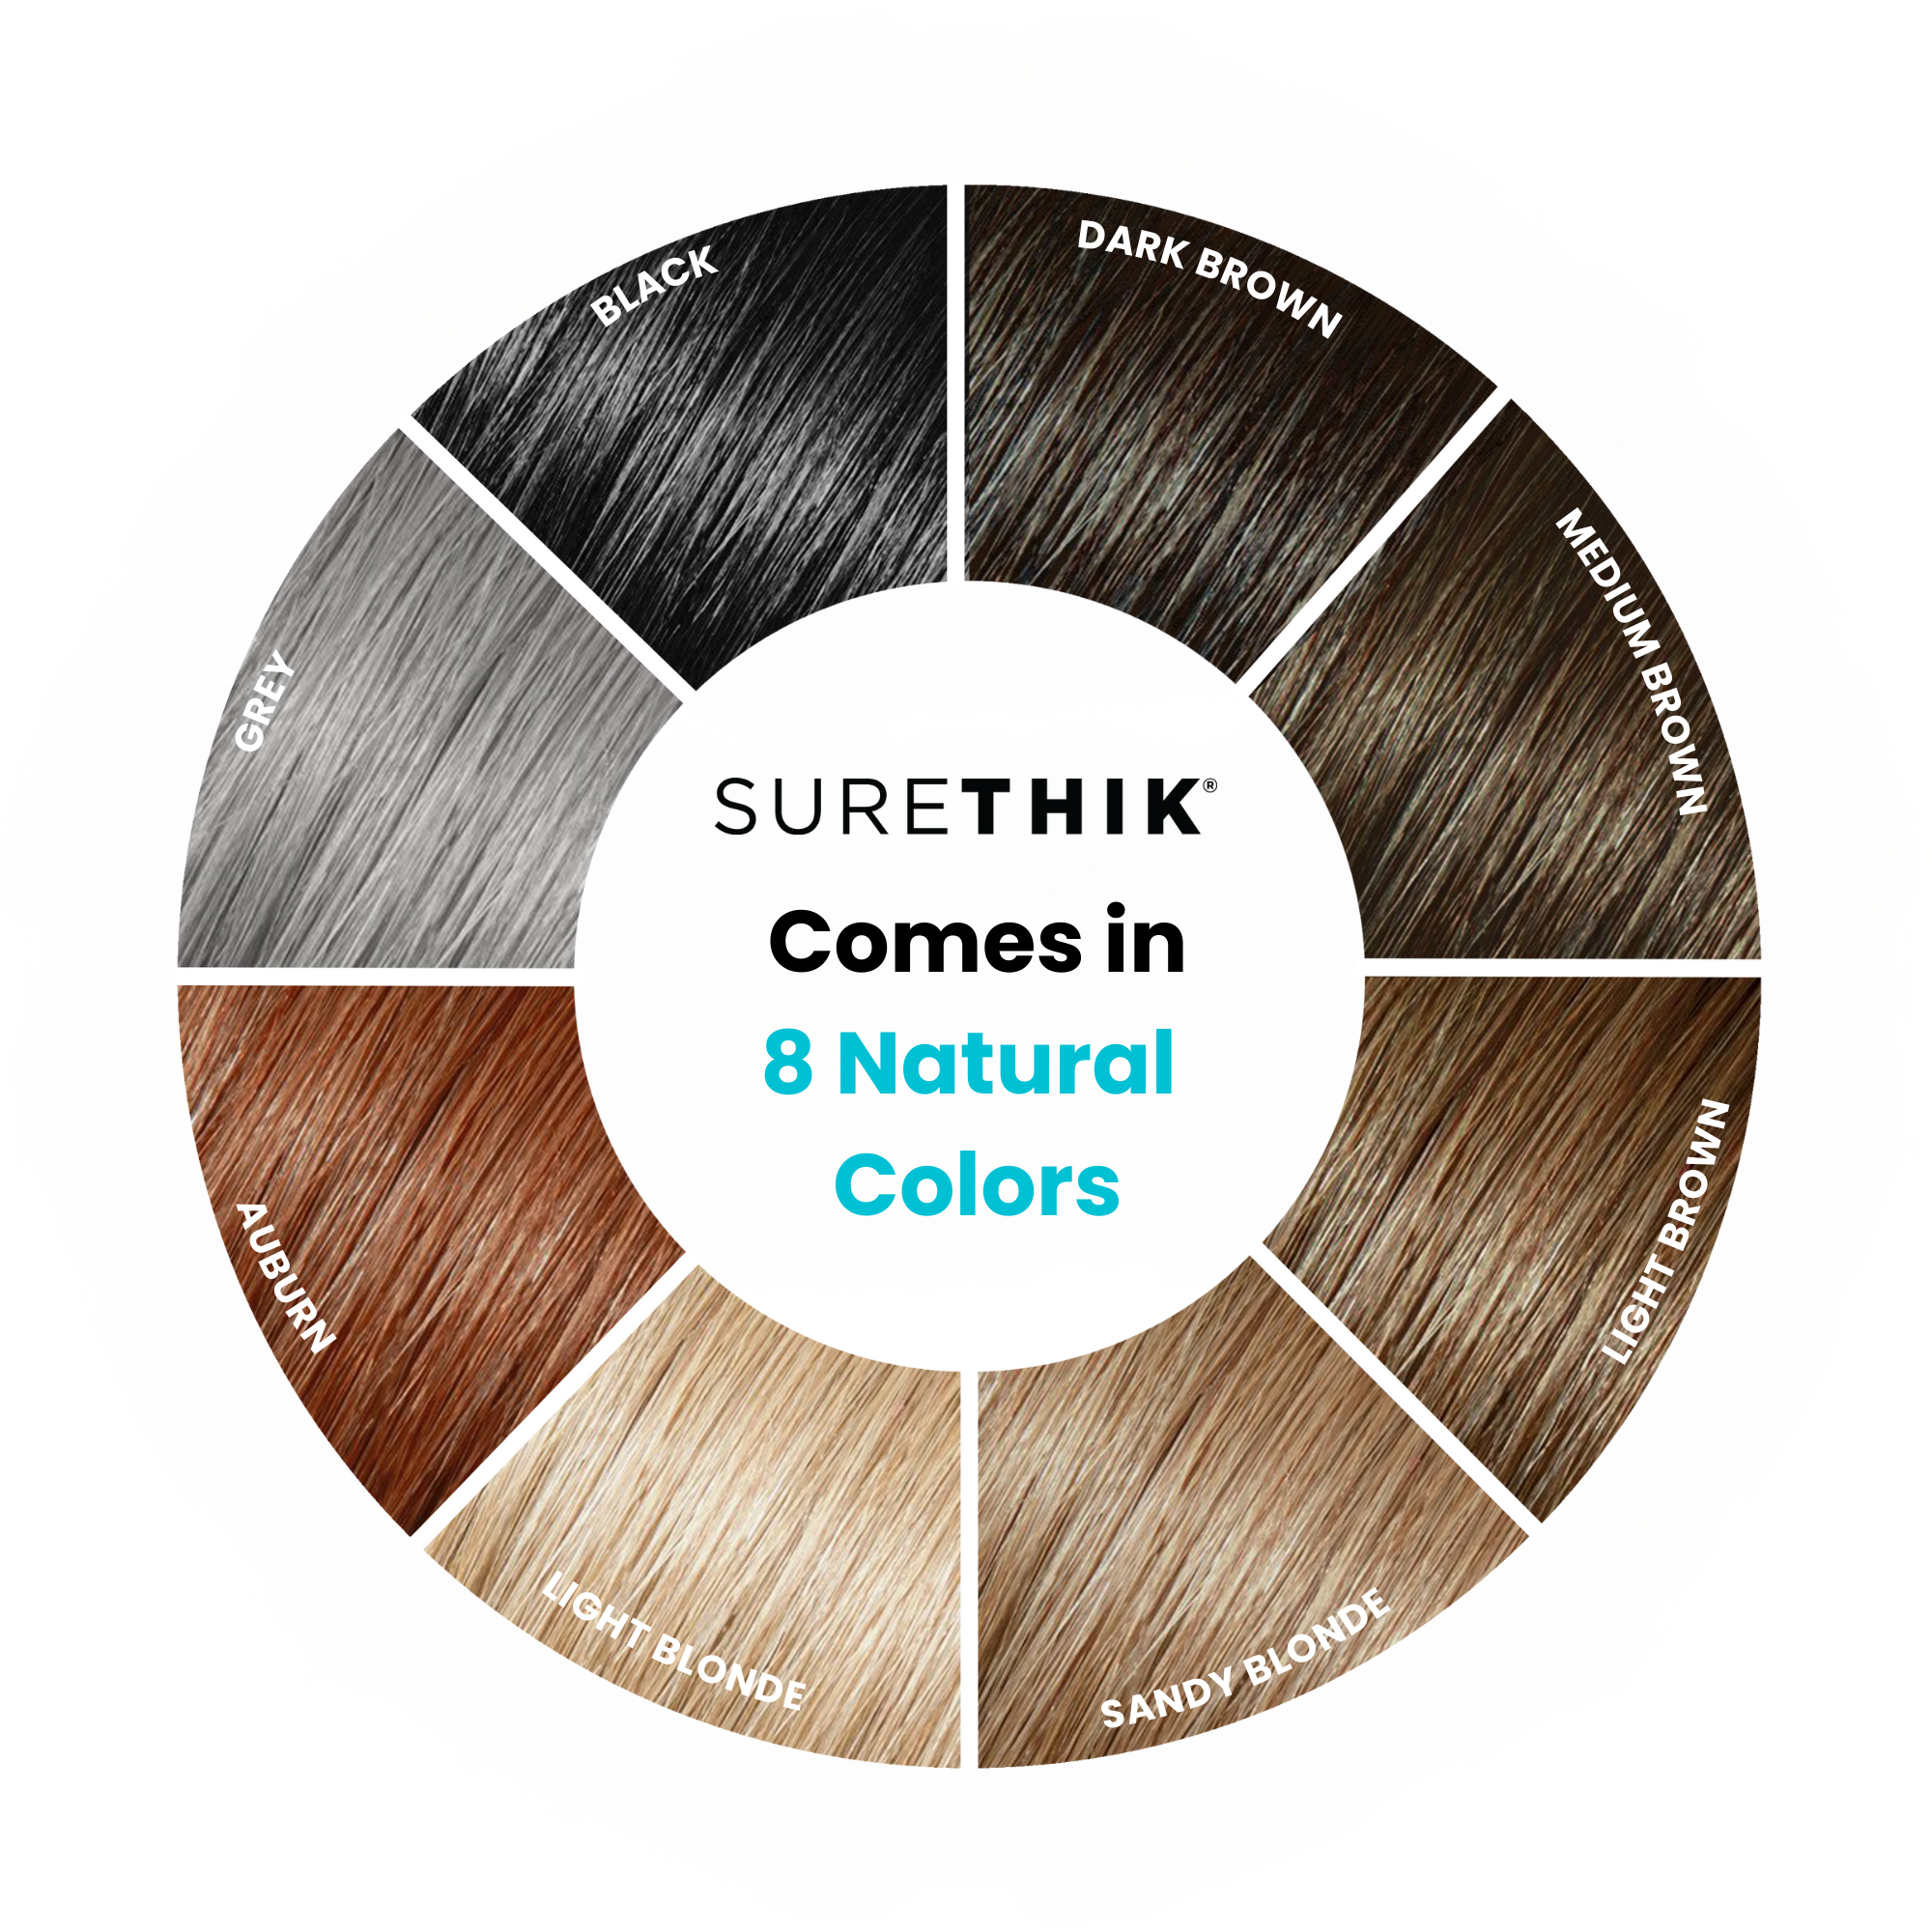 Package of 4 SureThik Hair Thickening Fibers 30g Bottles - Get 4 Bottles for the Price of 3!